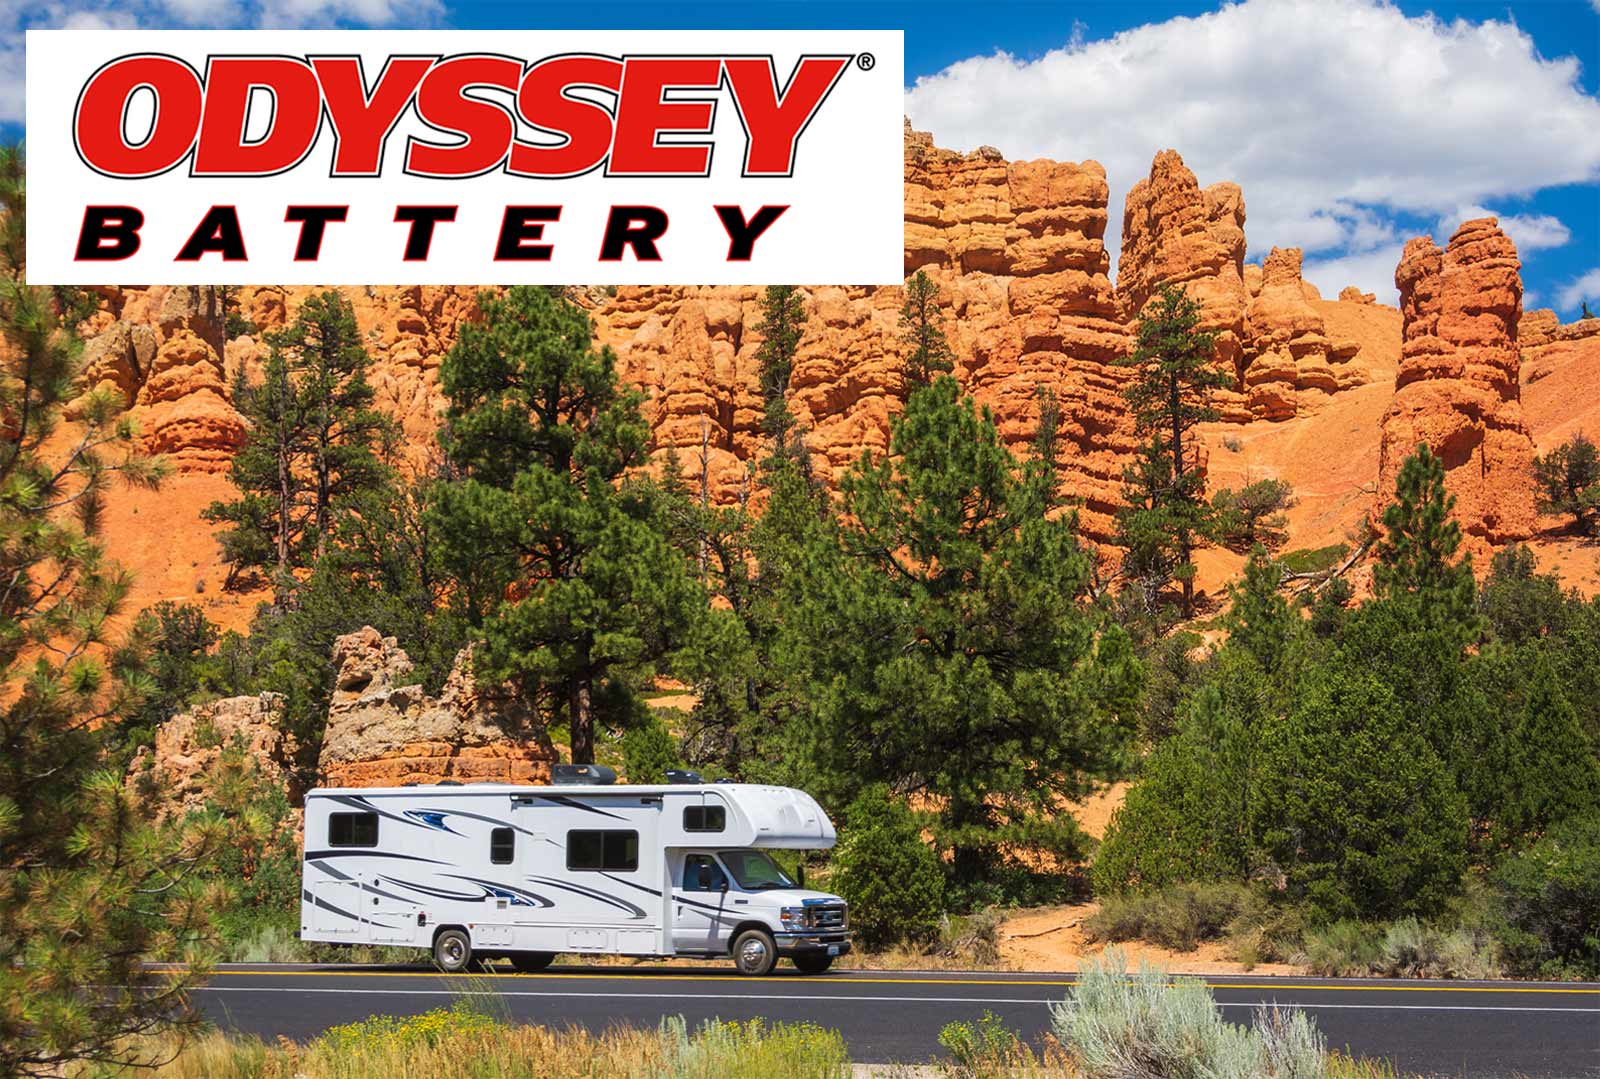 Odyssey Battery, RV on a road in front pine trees and tall red rock cliffs